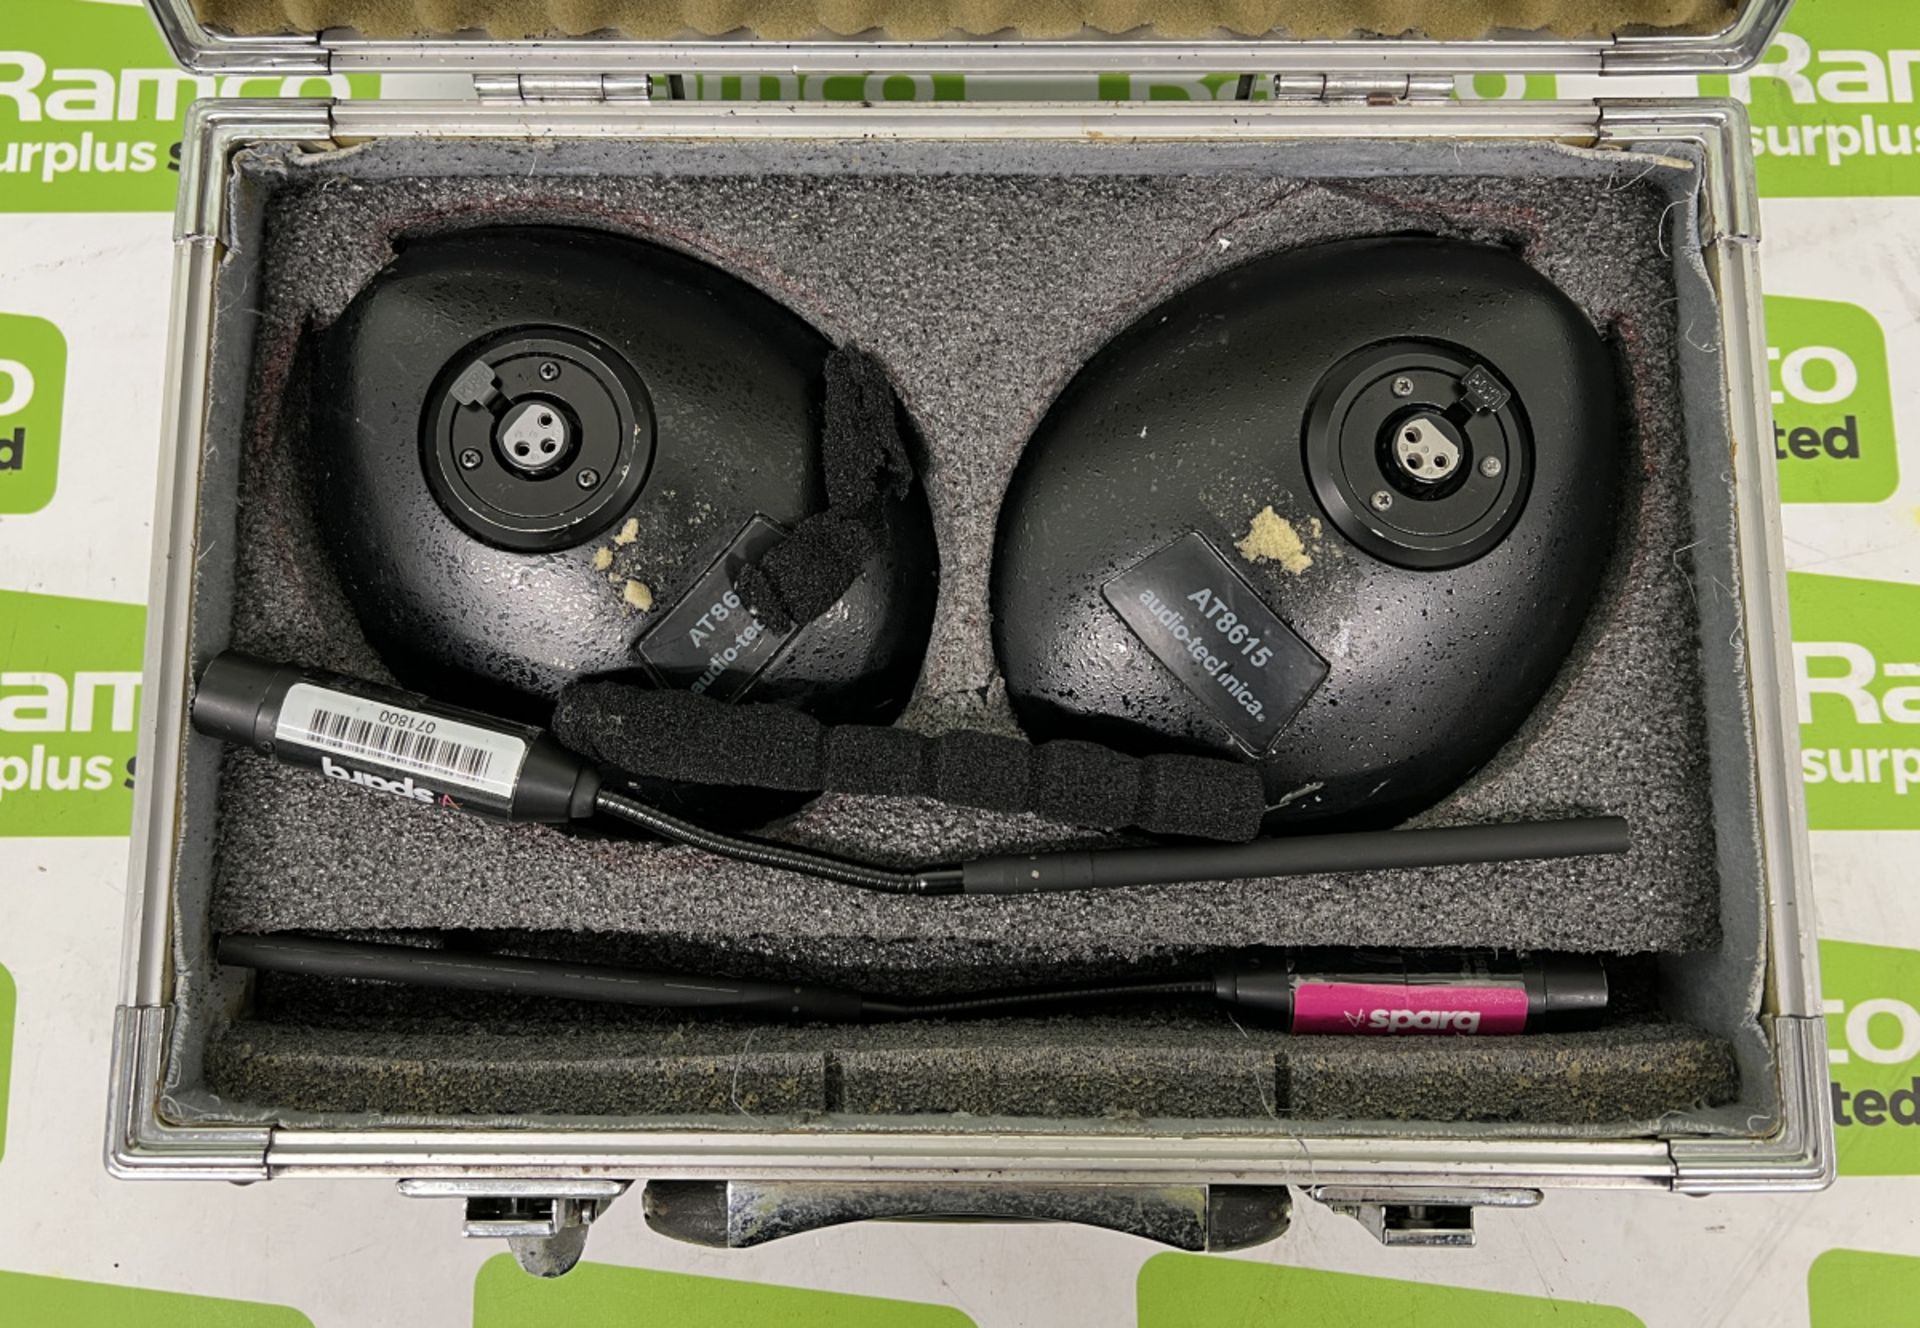 2x Audio Technica AT935QM lectern microphones with base plates in flight case - W 32 x D 22 x H 16cm - Image 2 of 5